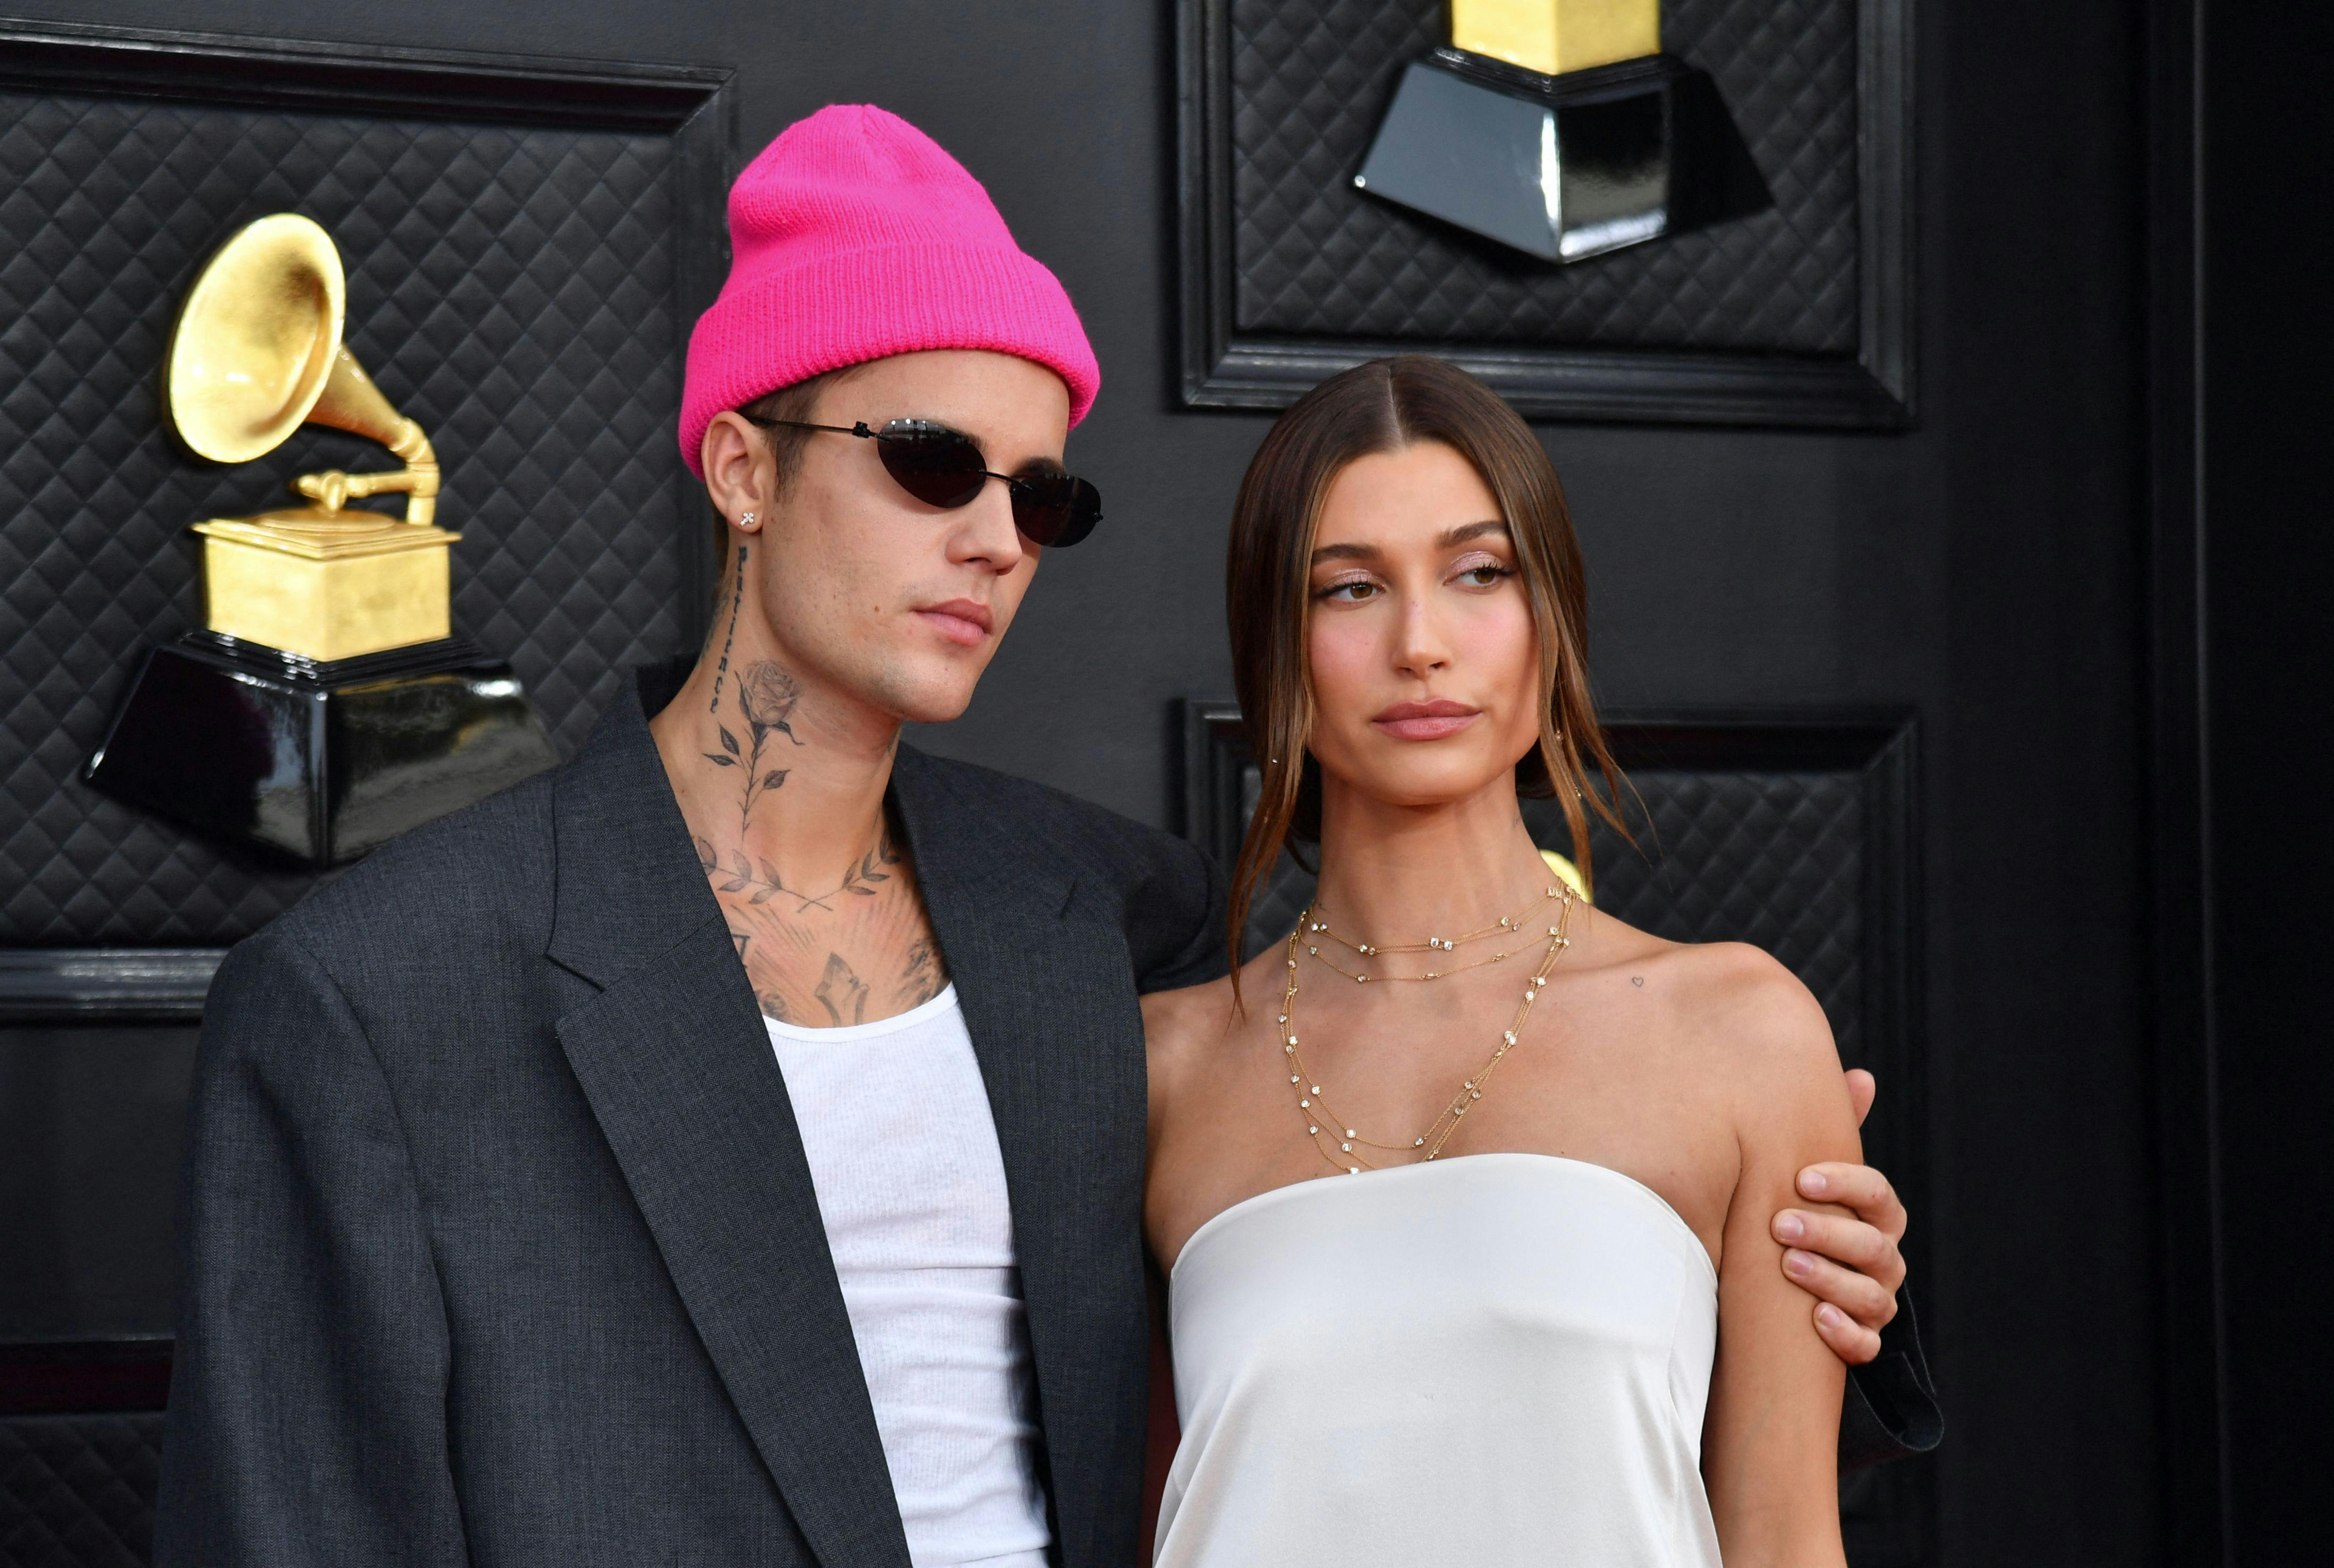 Canadian singer-songwriter Justin Bieber (L) and US model Hailey Bieber arrive for the 64th Annual Grammy Awards at the MGM Grand Garden Arena in Las Vegas on April 3, 2022. (Photo by ANGELA WEISS / AFP)